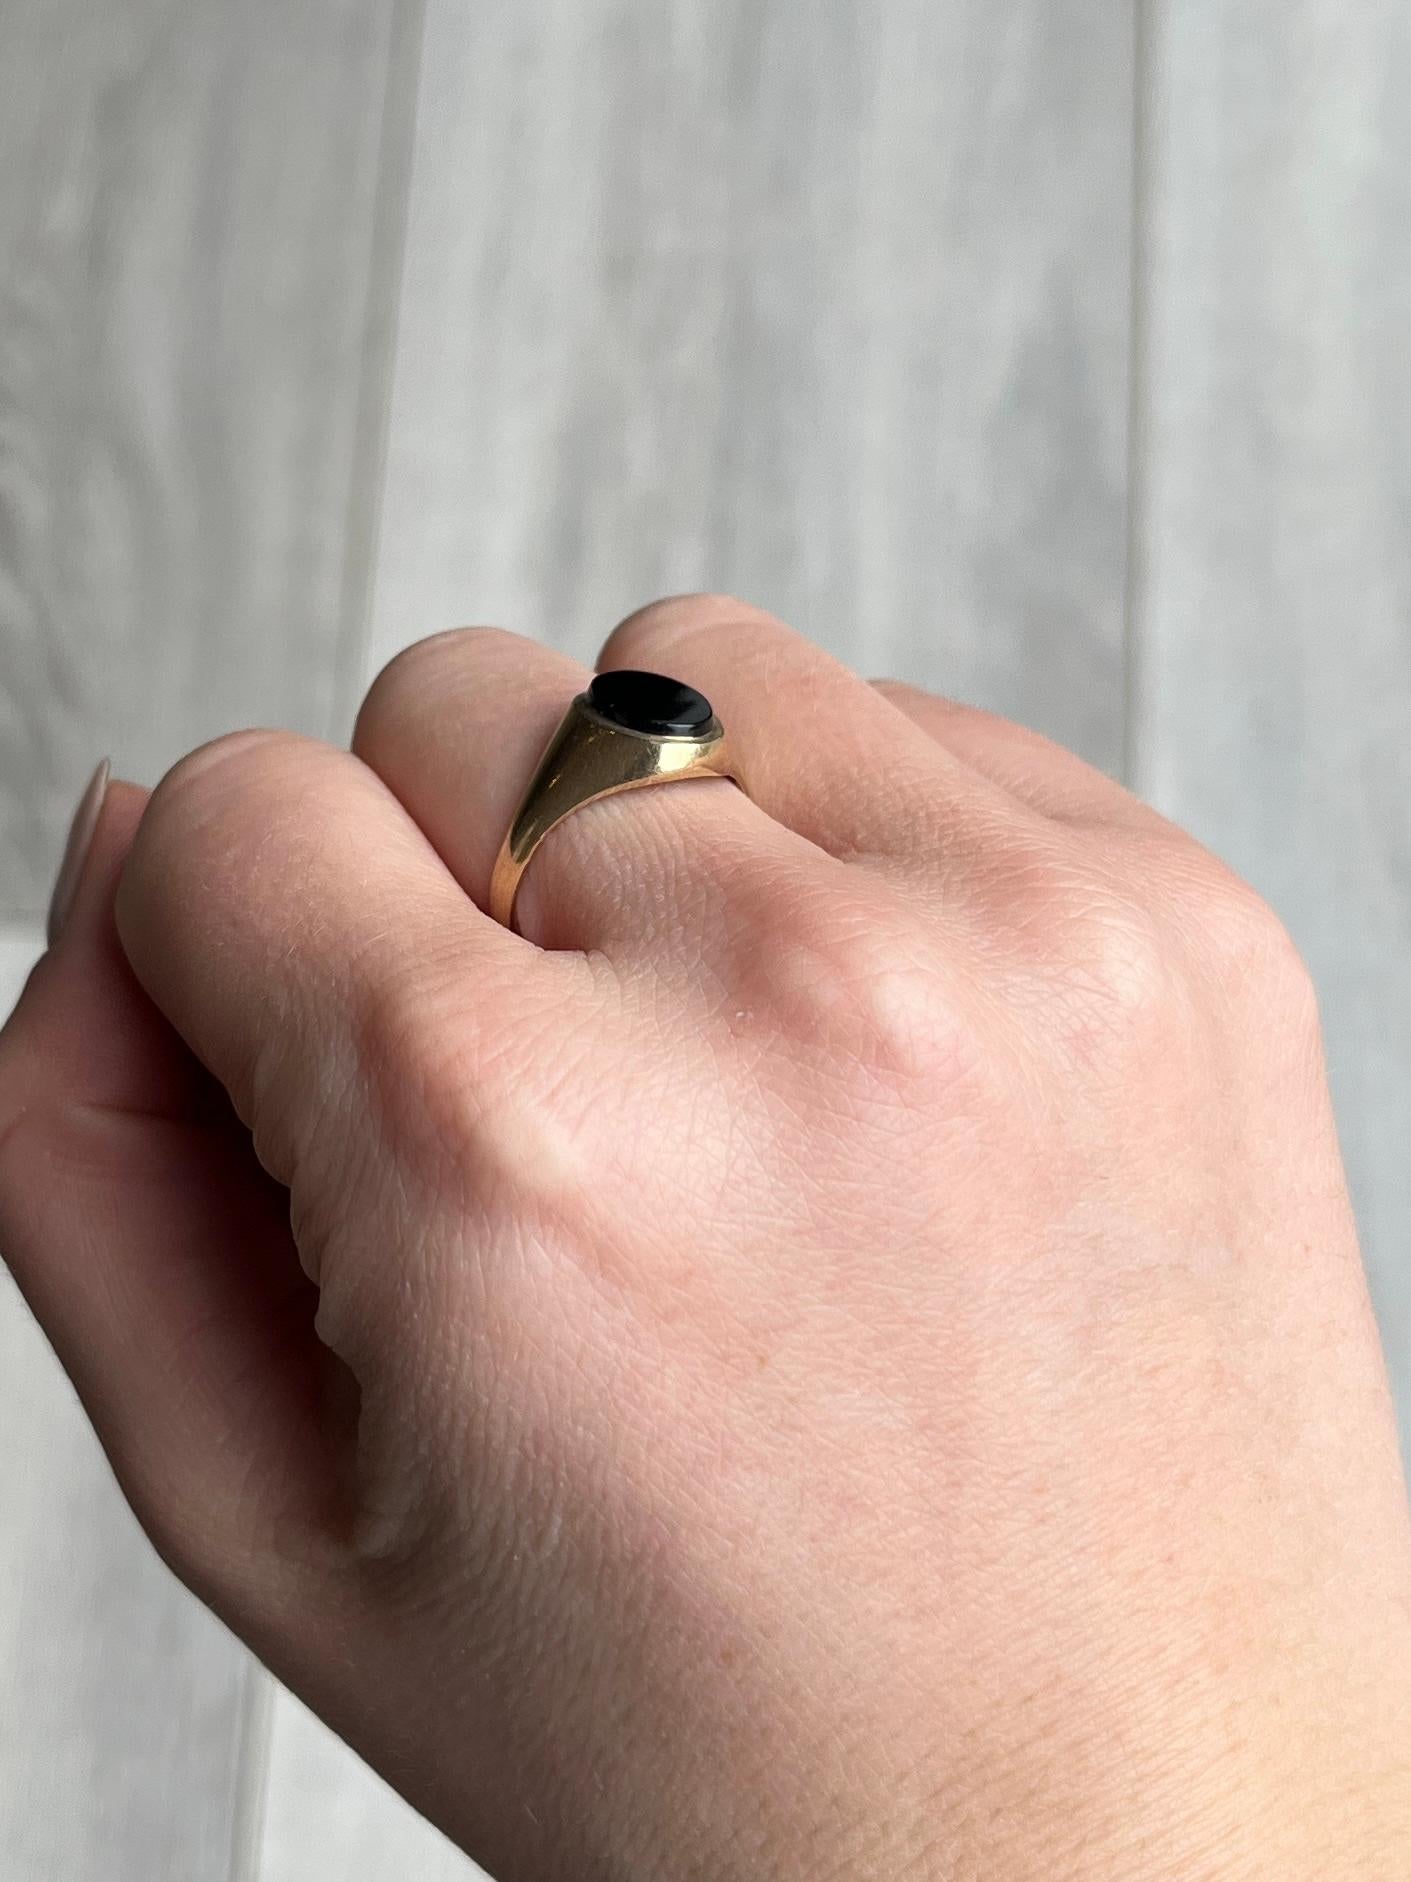 The onyx in this signet ring is in lovely condition and it so glossy! The stone is set within the 9ct gold  band. 

Ring Size: W or 11
Stone Dimensions: 12x10mm 

Weight: 2.4g